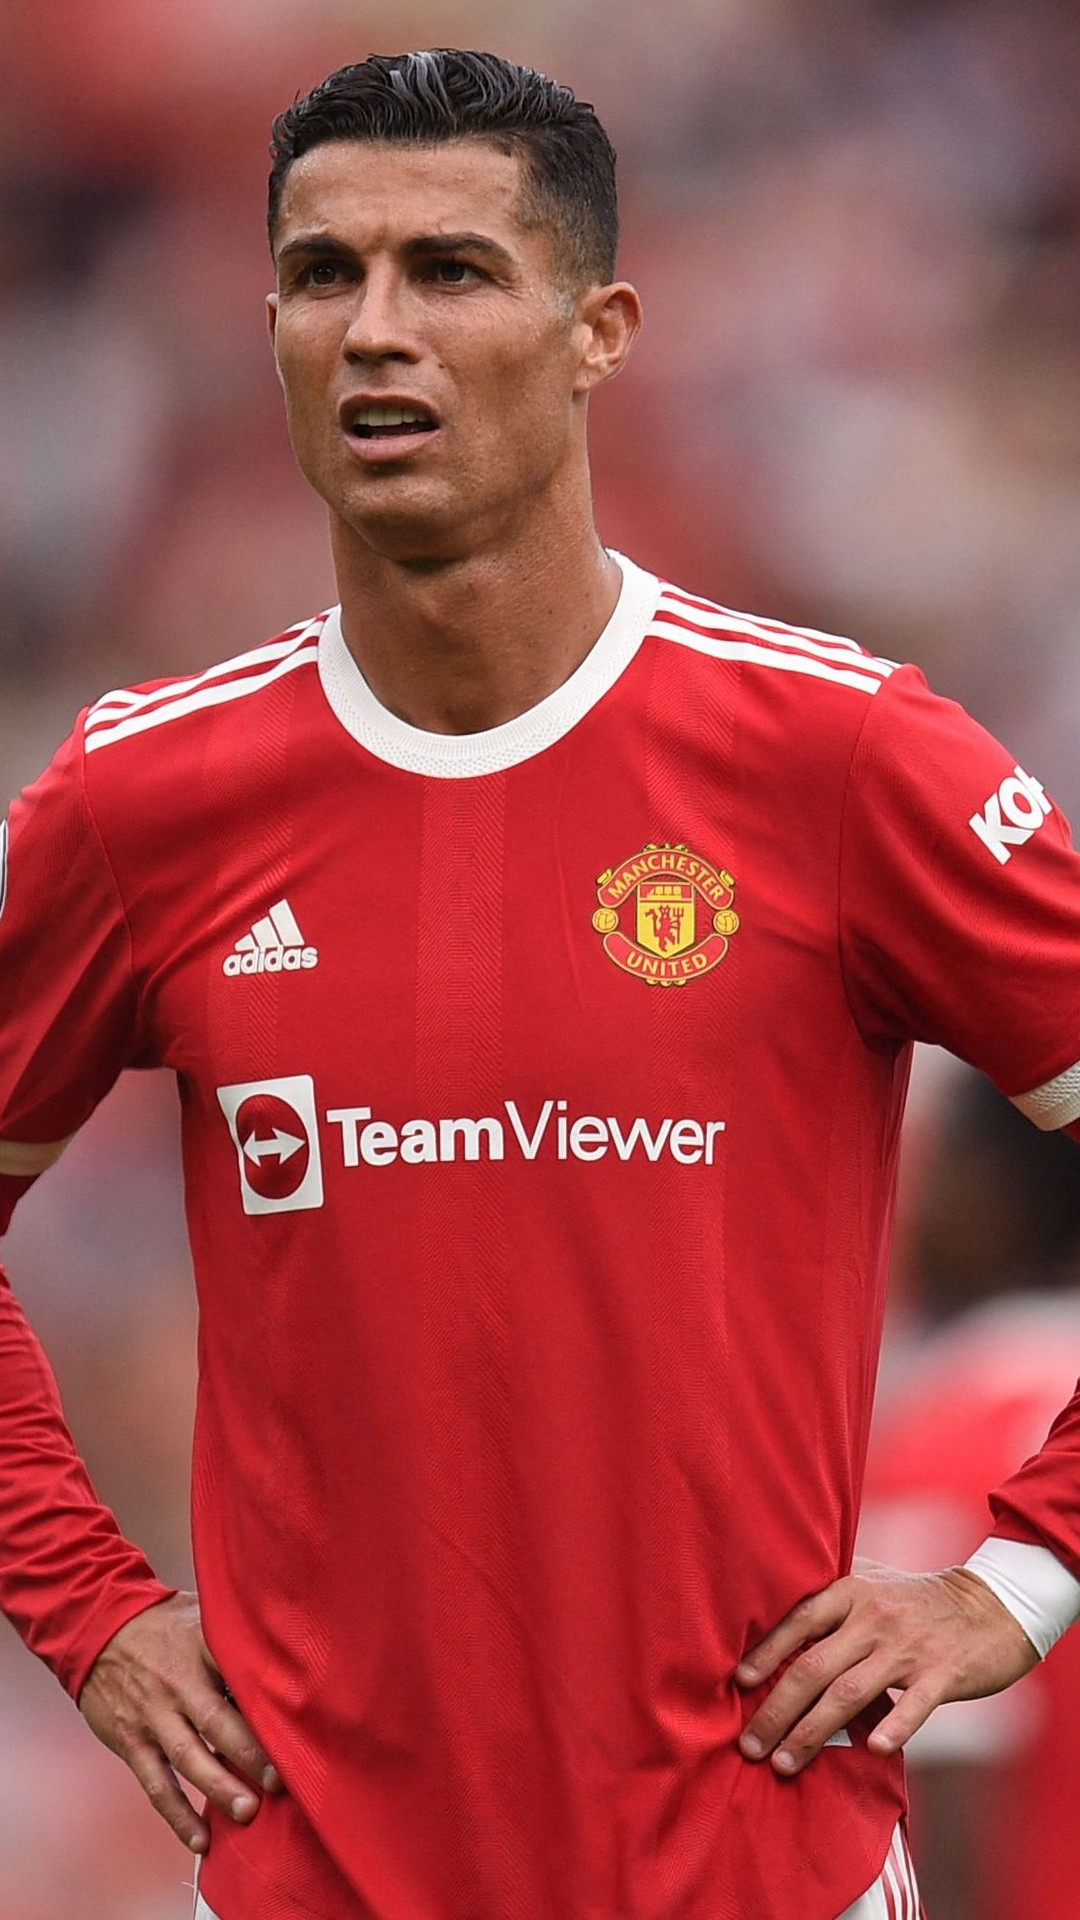 Cristiano Ronaldo Manchester United Wallpaper iPhone HD with high-resolution 1080x1920 pixel. You can use this wallpaper for your Desktop Computers, Mac Screensavers, Windows Backgrounds, iPhone Wallpapers, Tablet or Android Lock screen and another Mobile device